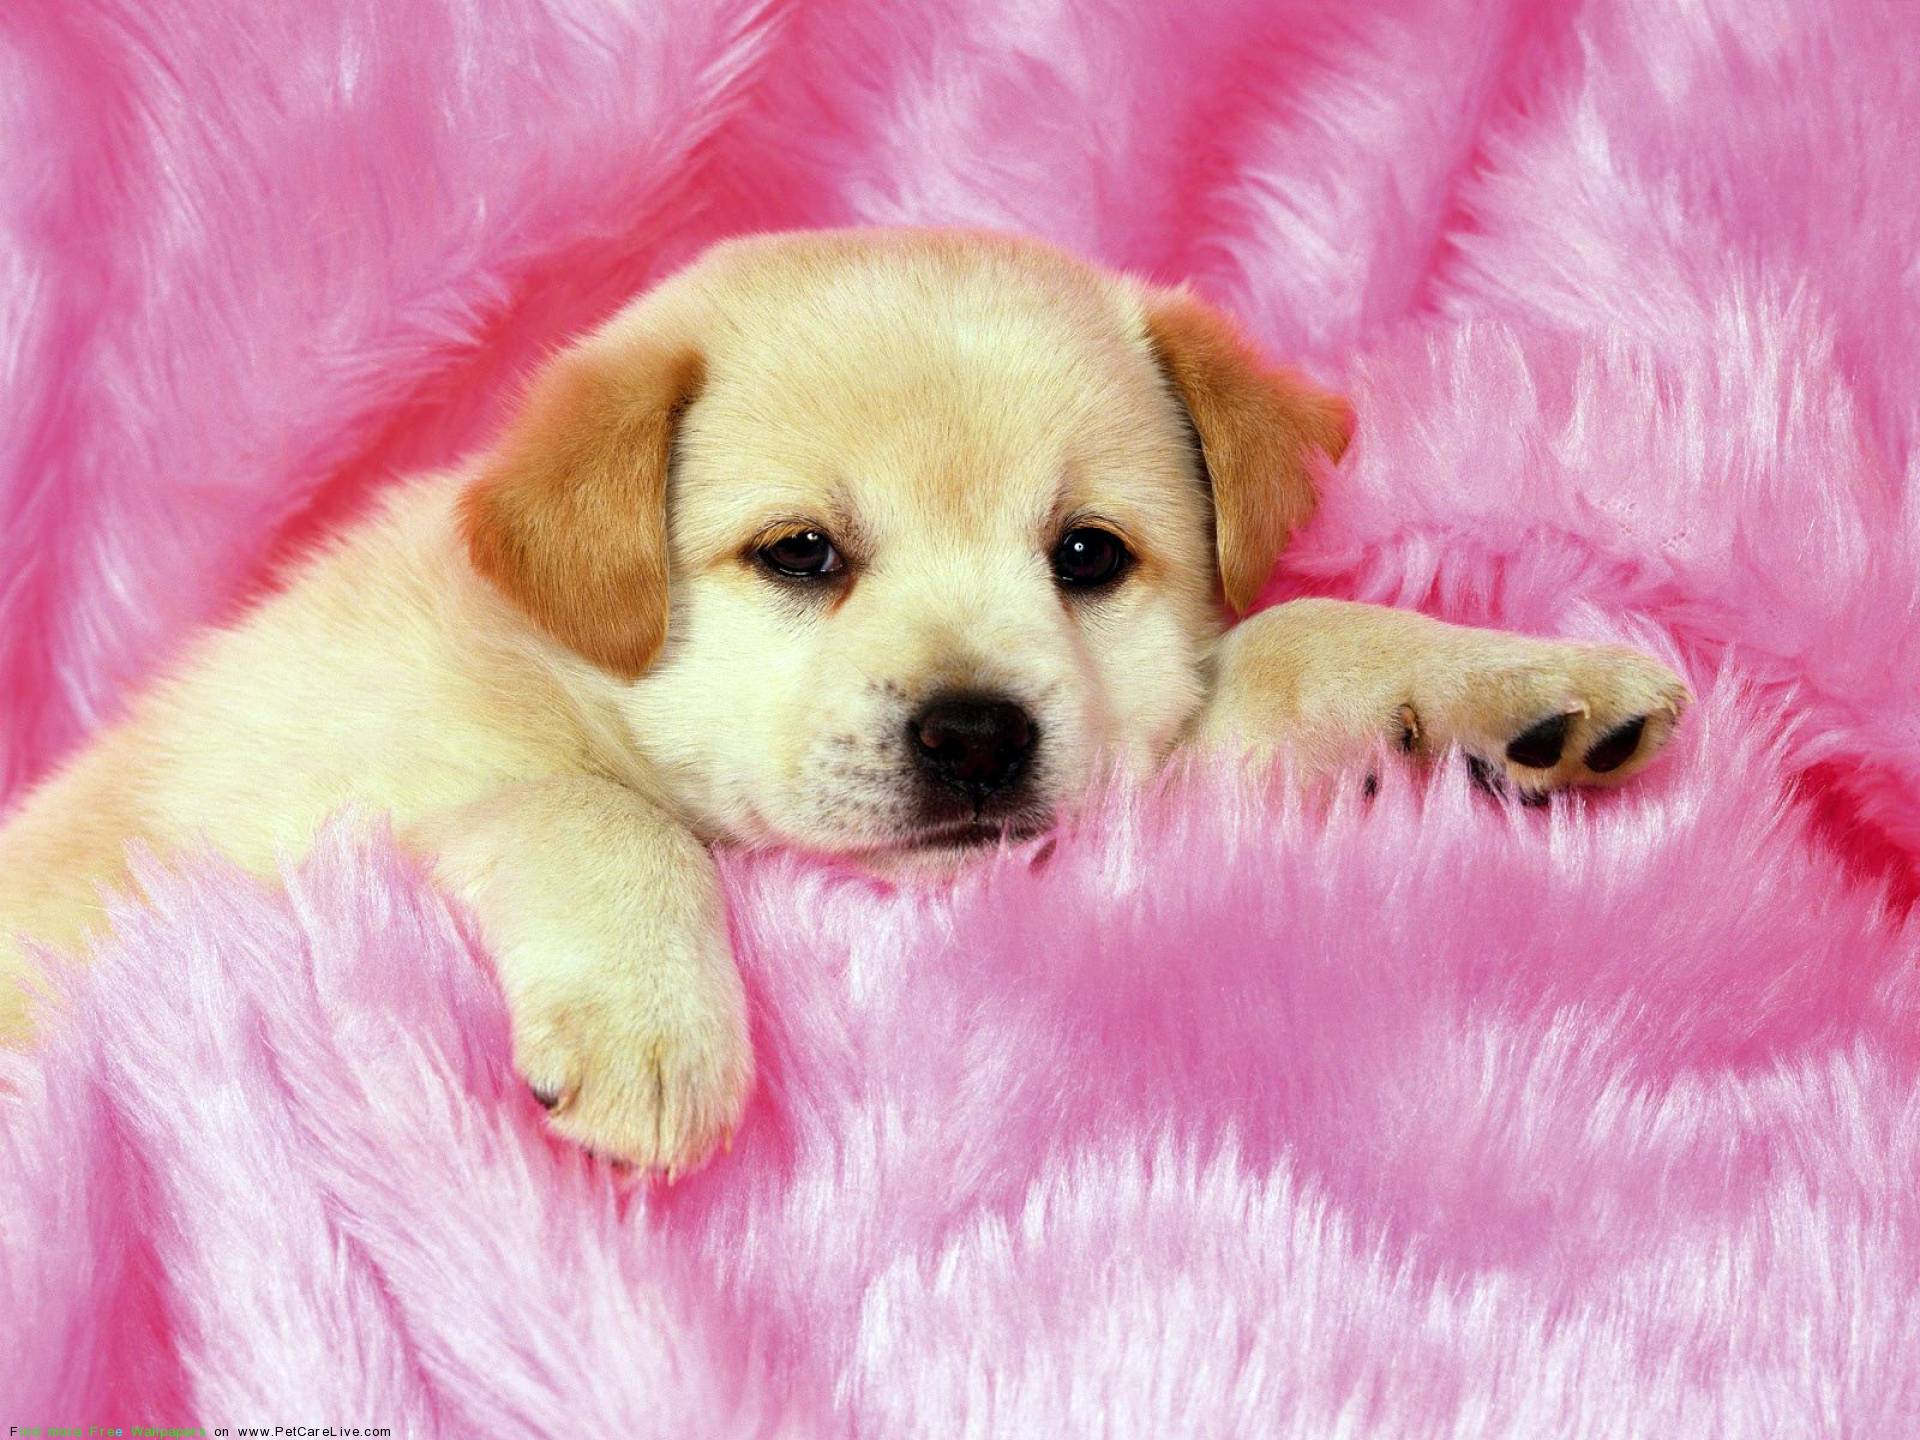 Wallpapers Of Puppies - Wallpaper Cave